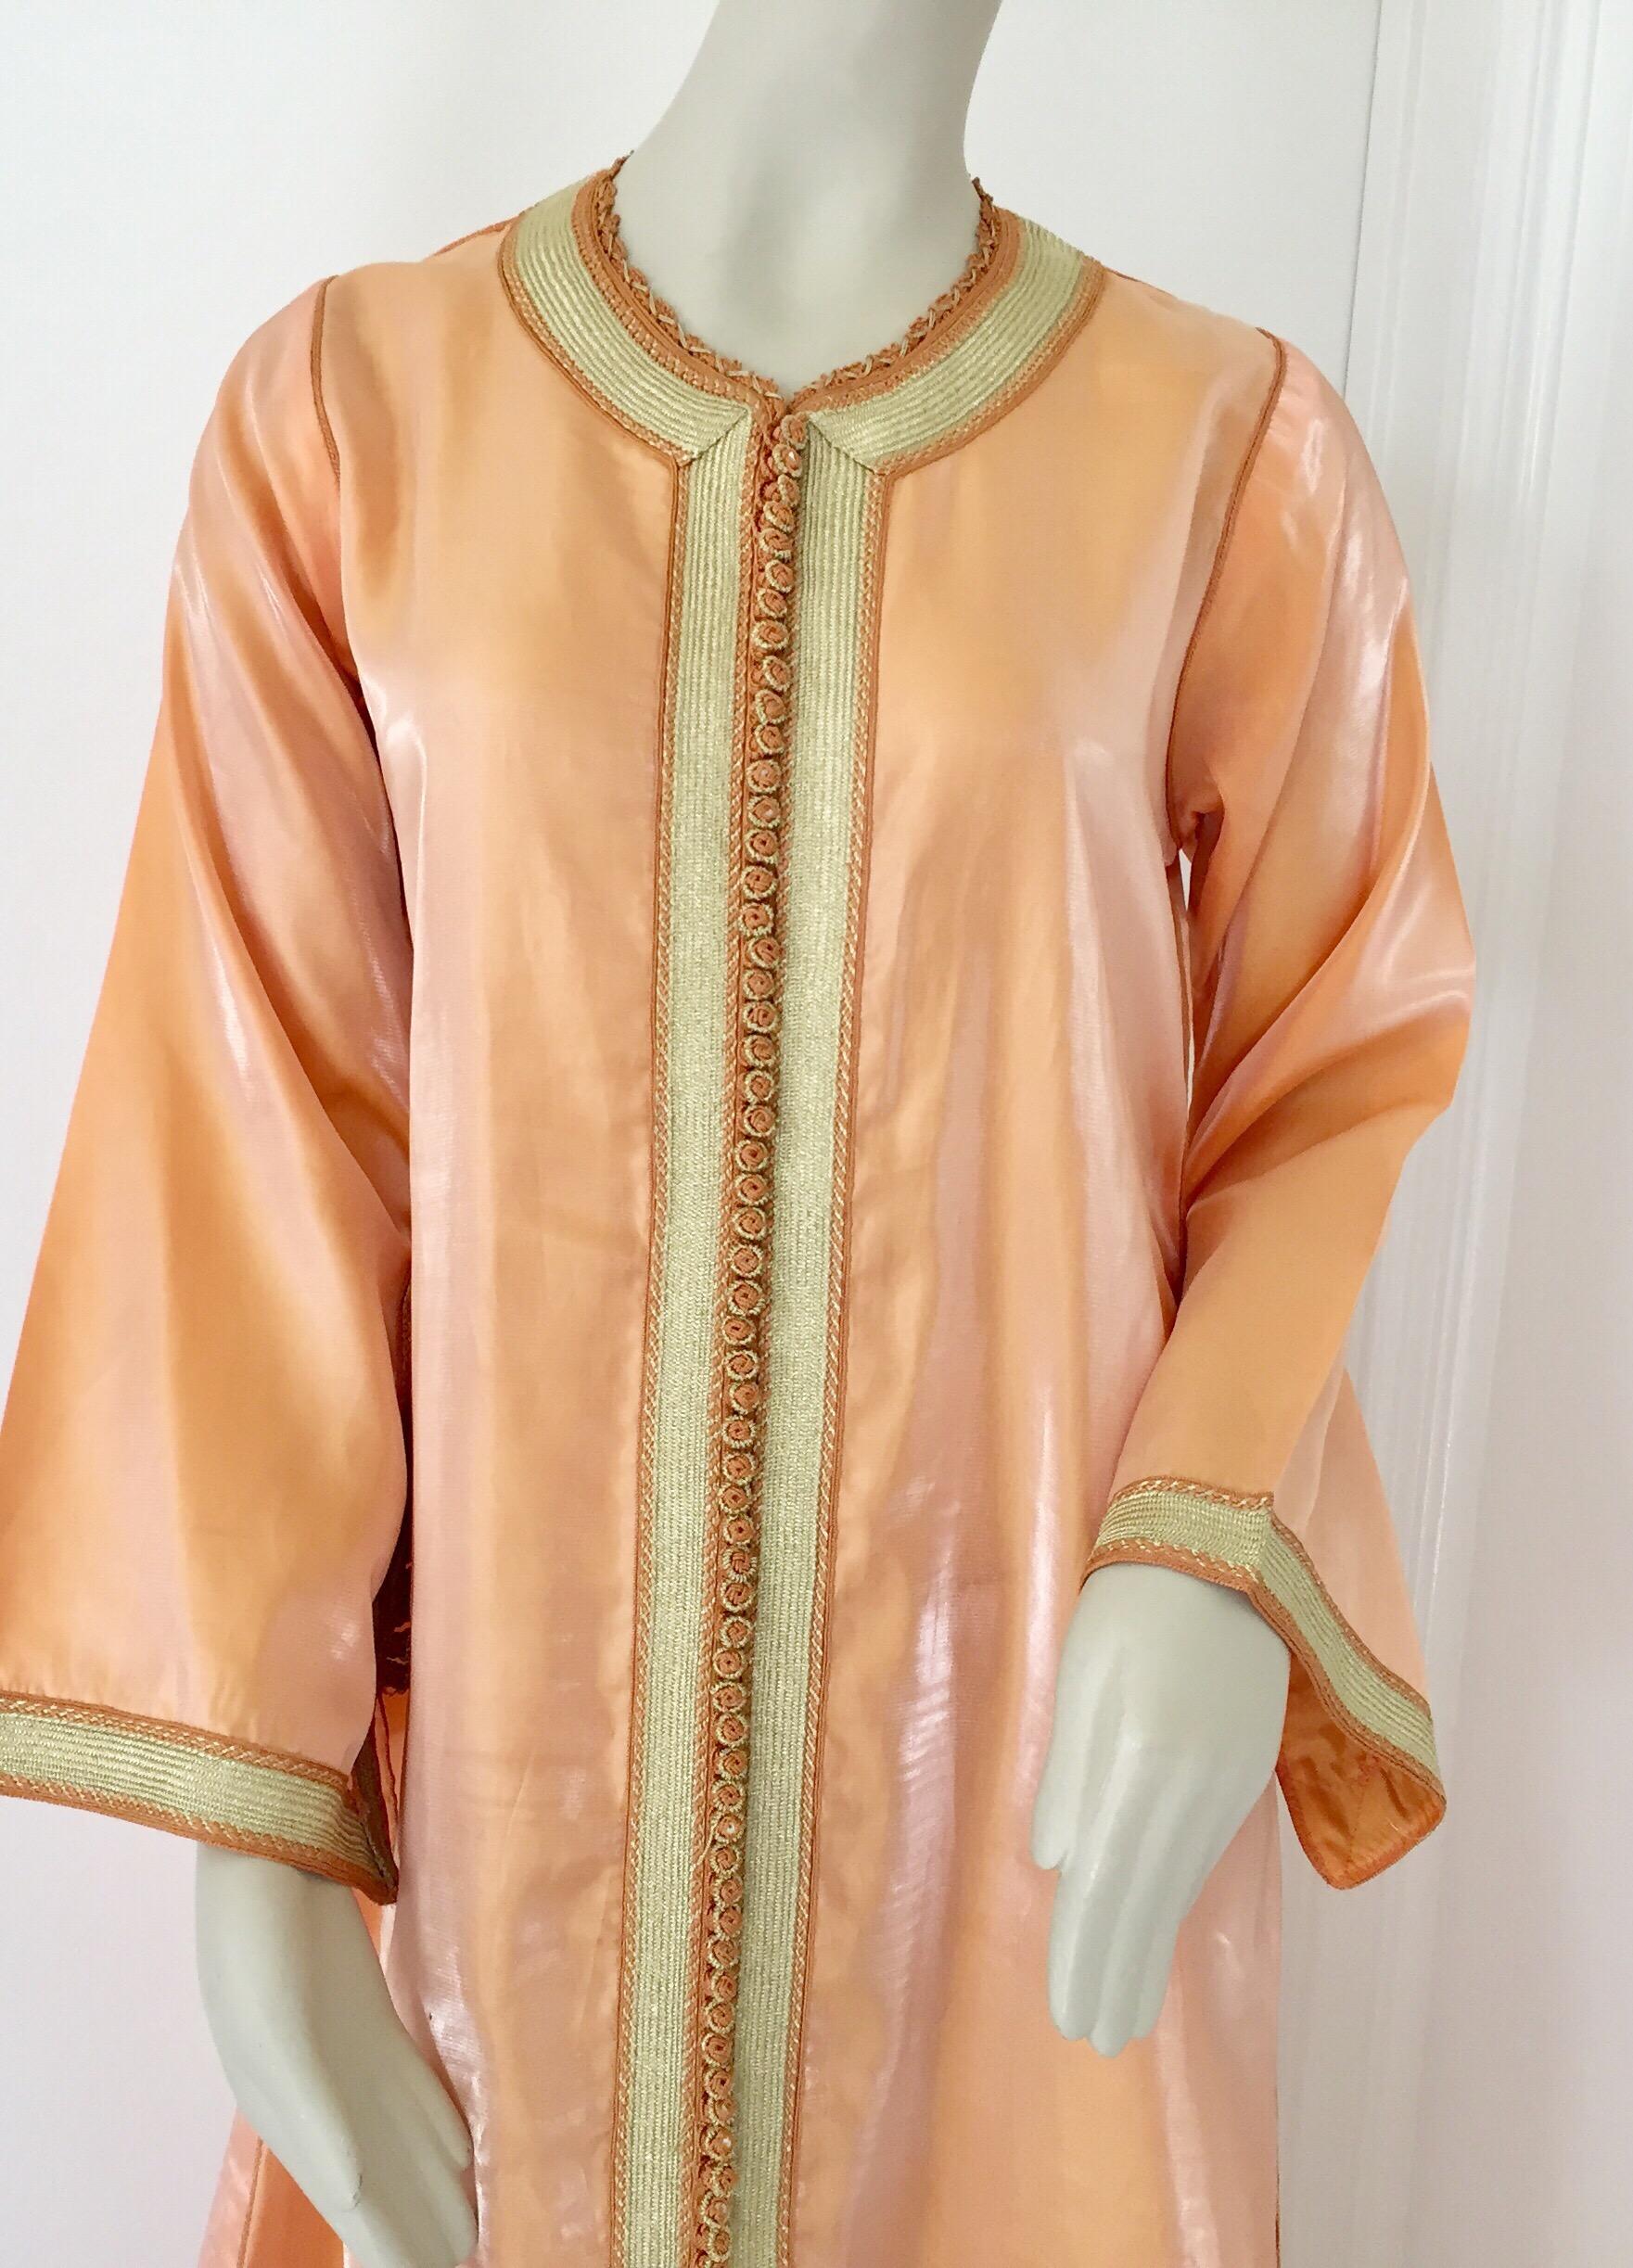 Moroccan caftan, evening or interior adorned with white pearls.
Handcrafted vintage exotic 1970s kaftan gown.
The luminous orange maxi dress caftan is adorned in front with floral embroidered patterned and gold trim.
Great chic maxi dress